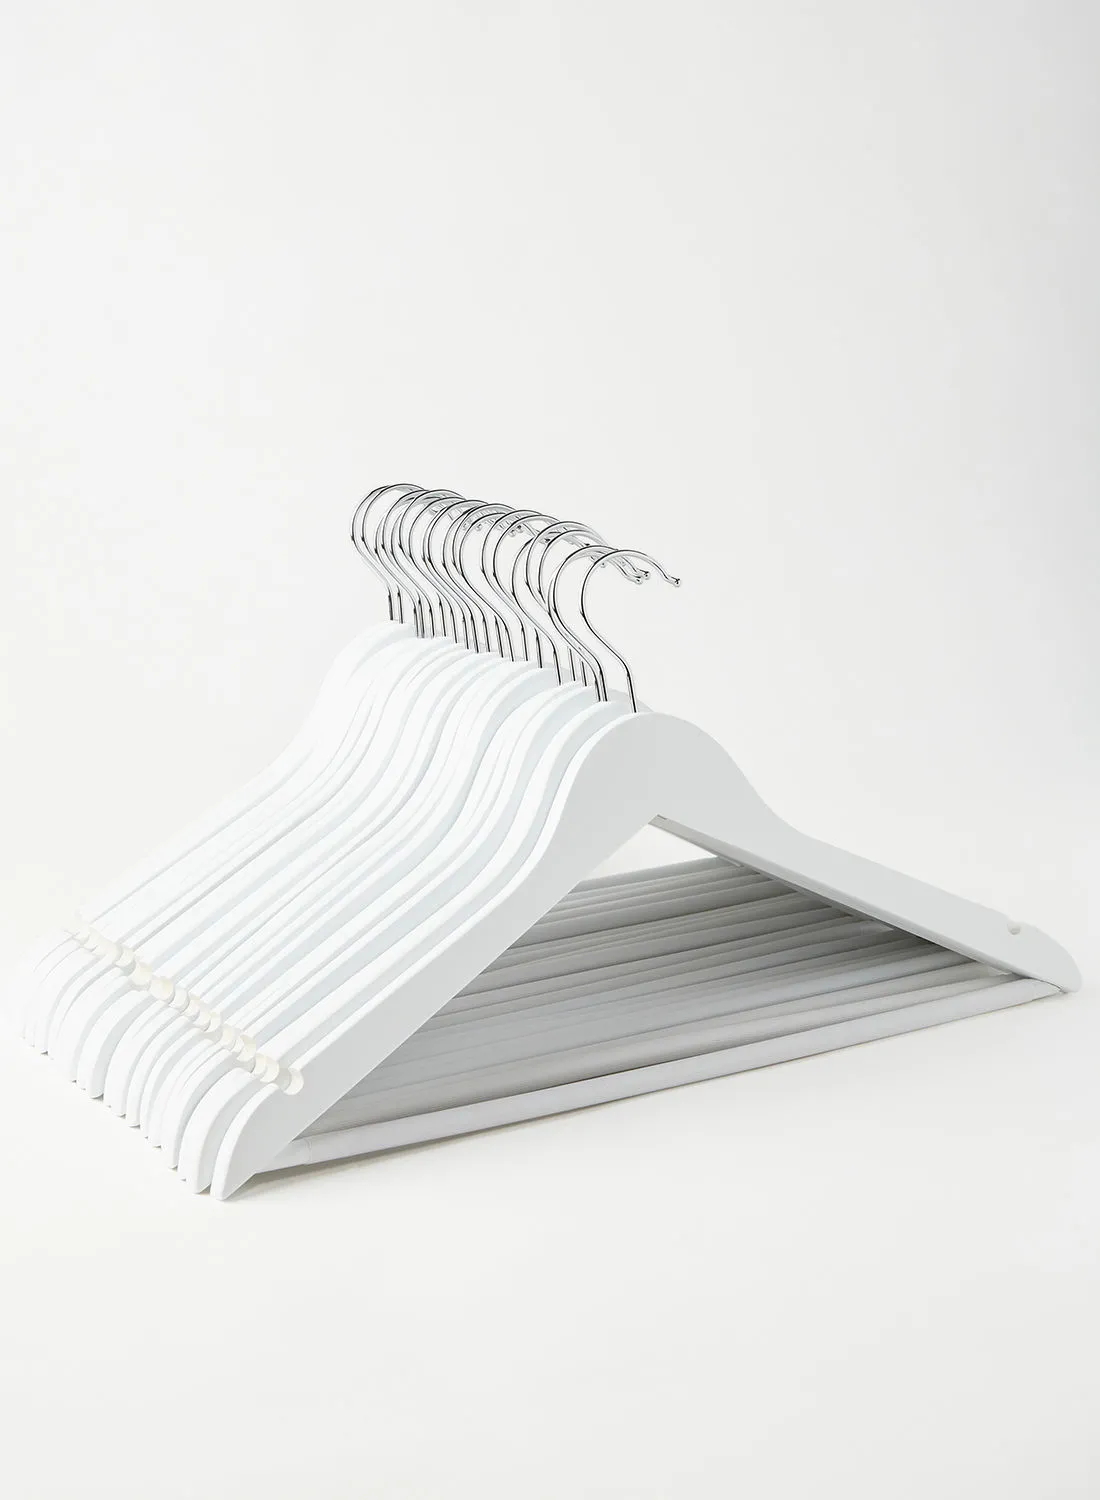 ebb & flow 20 Piece Wooden Multifunctional Hanger Set In Neutral Colour Made In Sturdy Material For Closet Organization White/Silver 44X22.5 cm